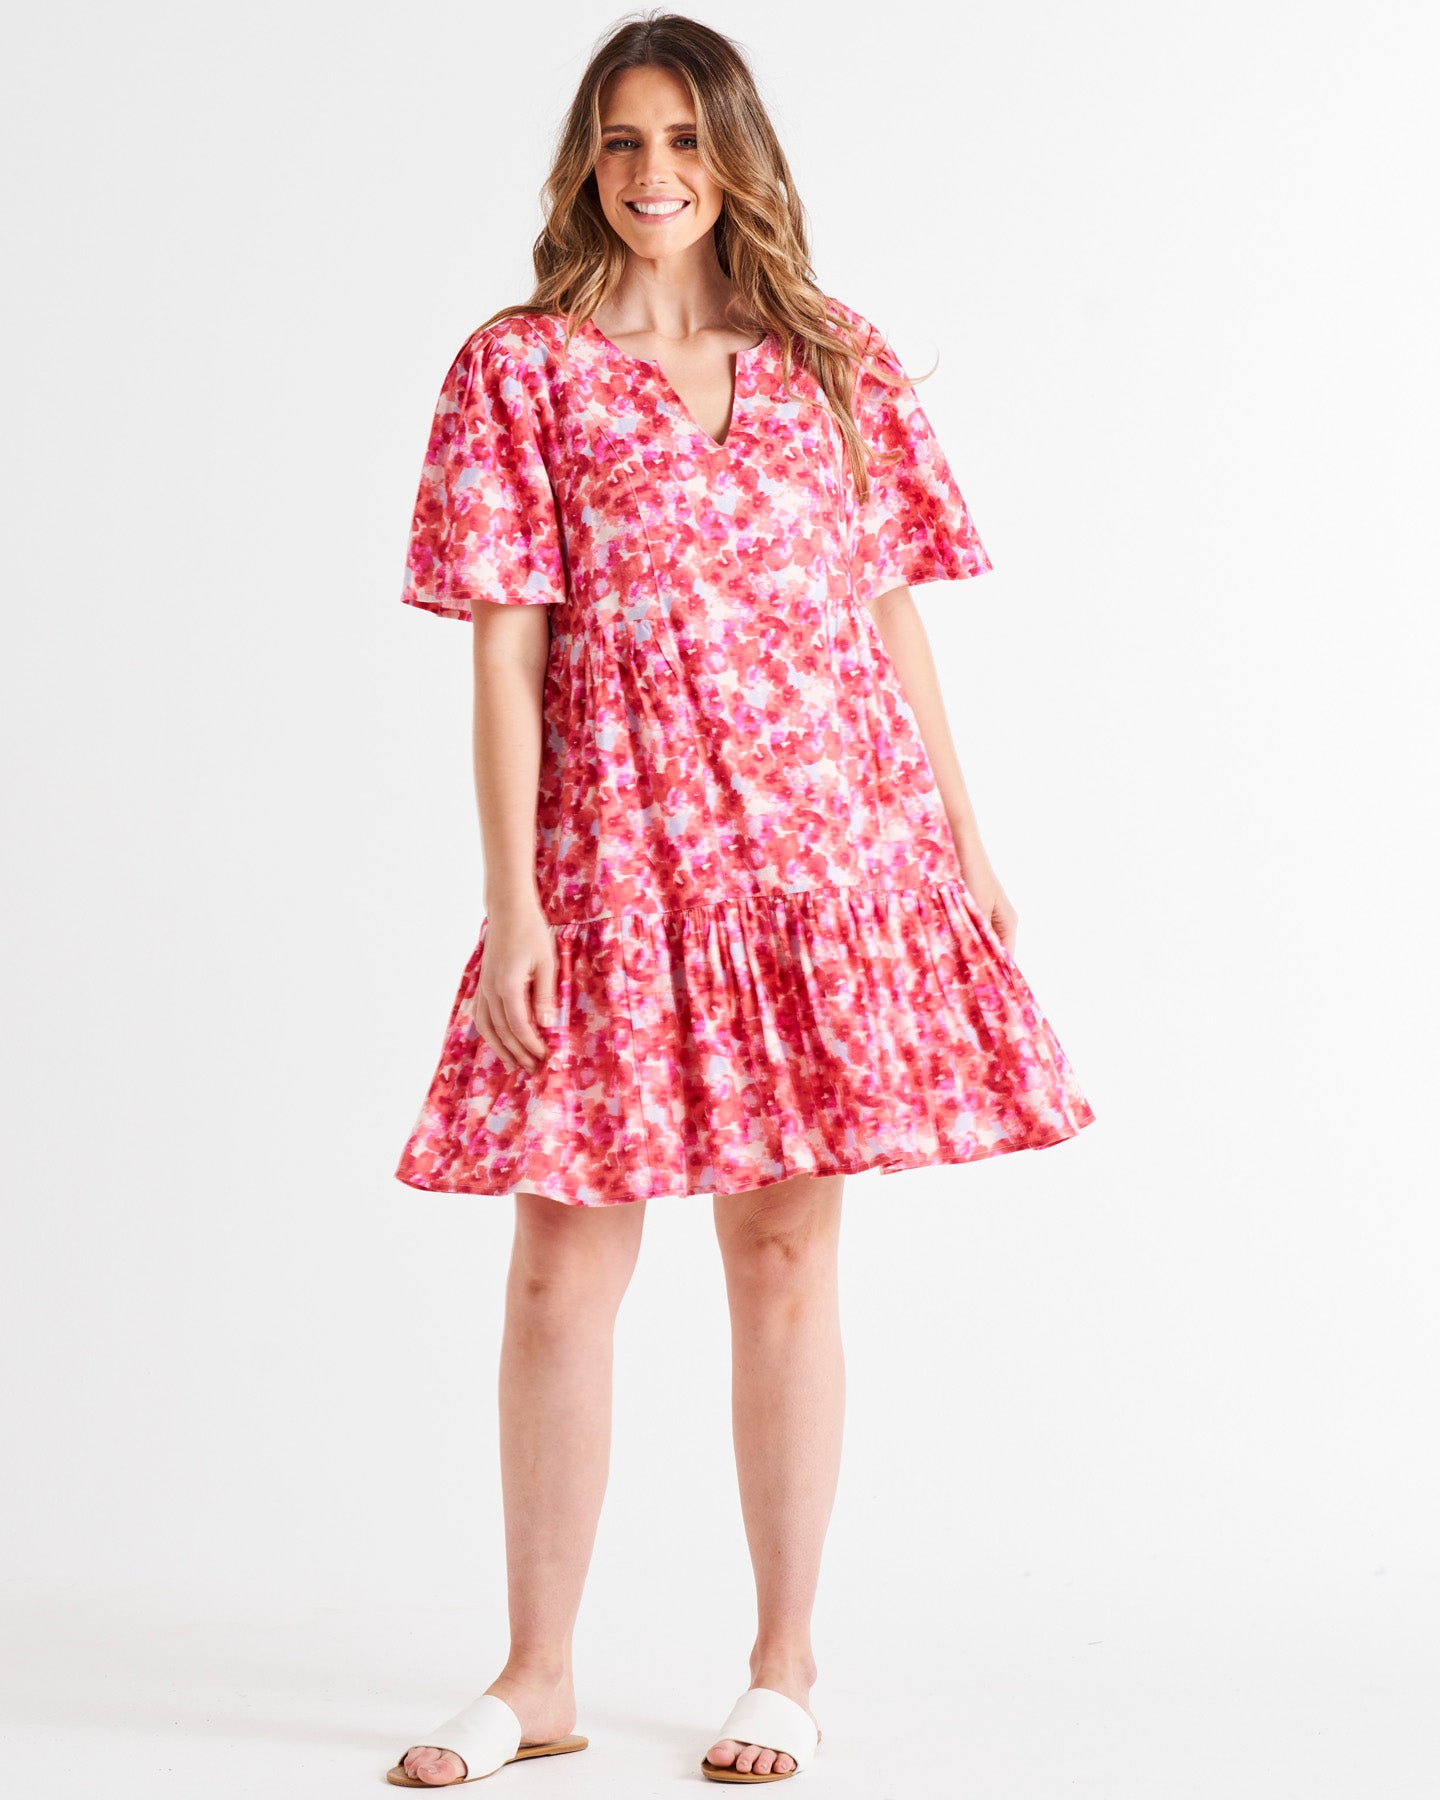 Amara Relaxed Tiered Linen-Blend Above-Knee Dress - Pink/Red Floral Print